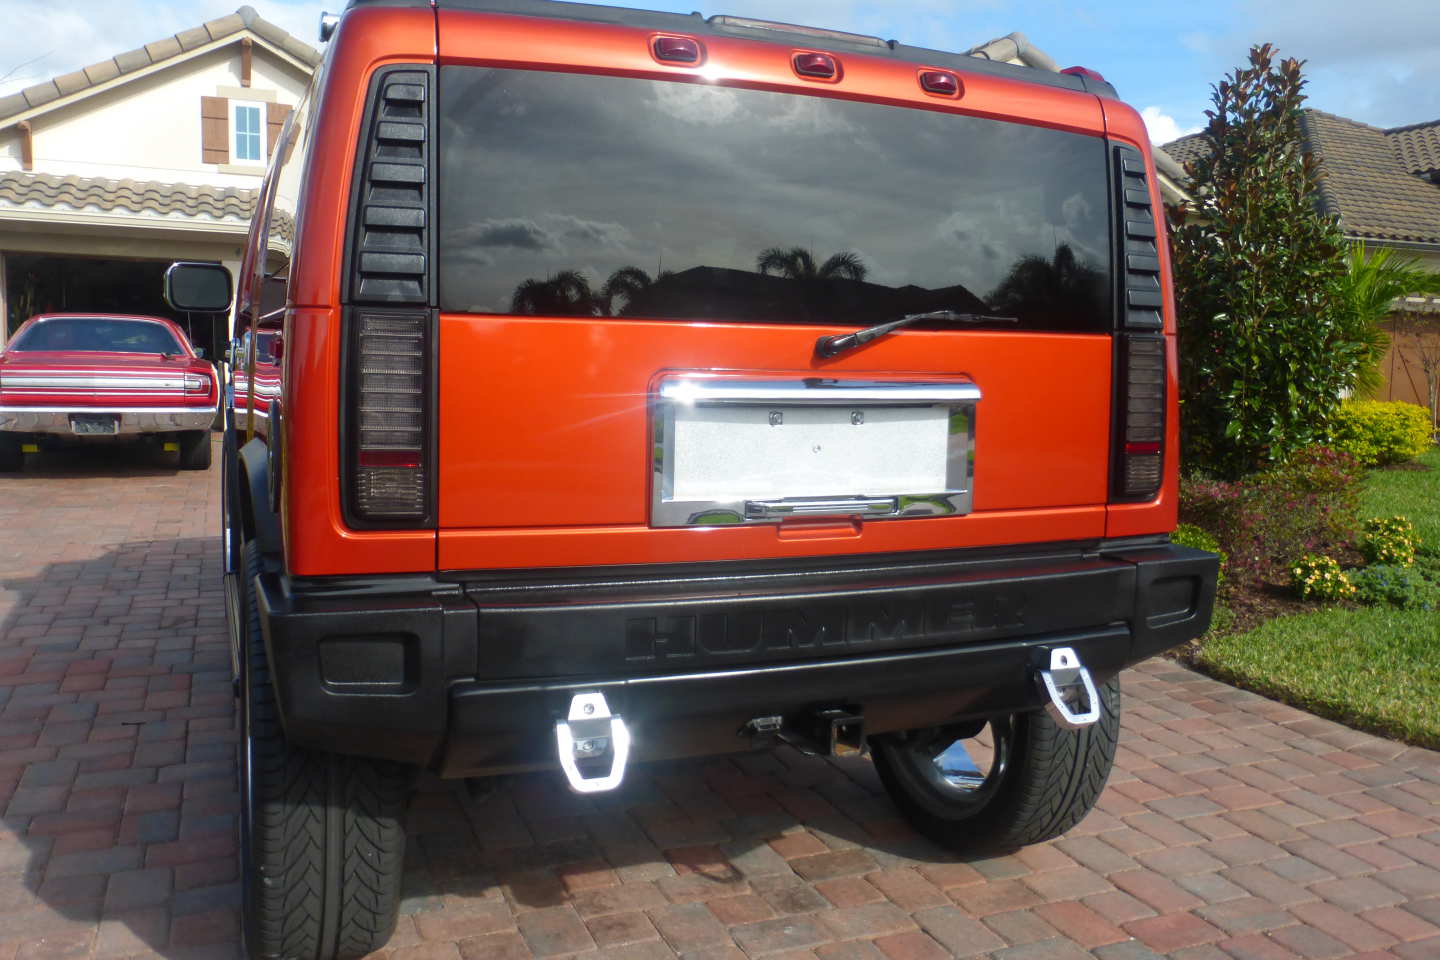 3rd Image of a 2003 HUMMER H2 3/4 TON